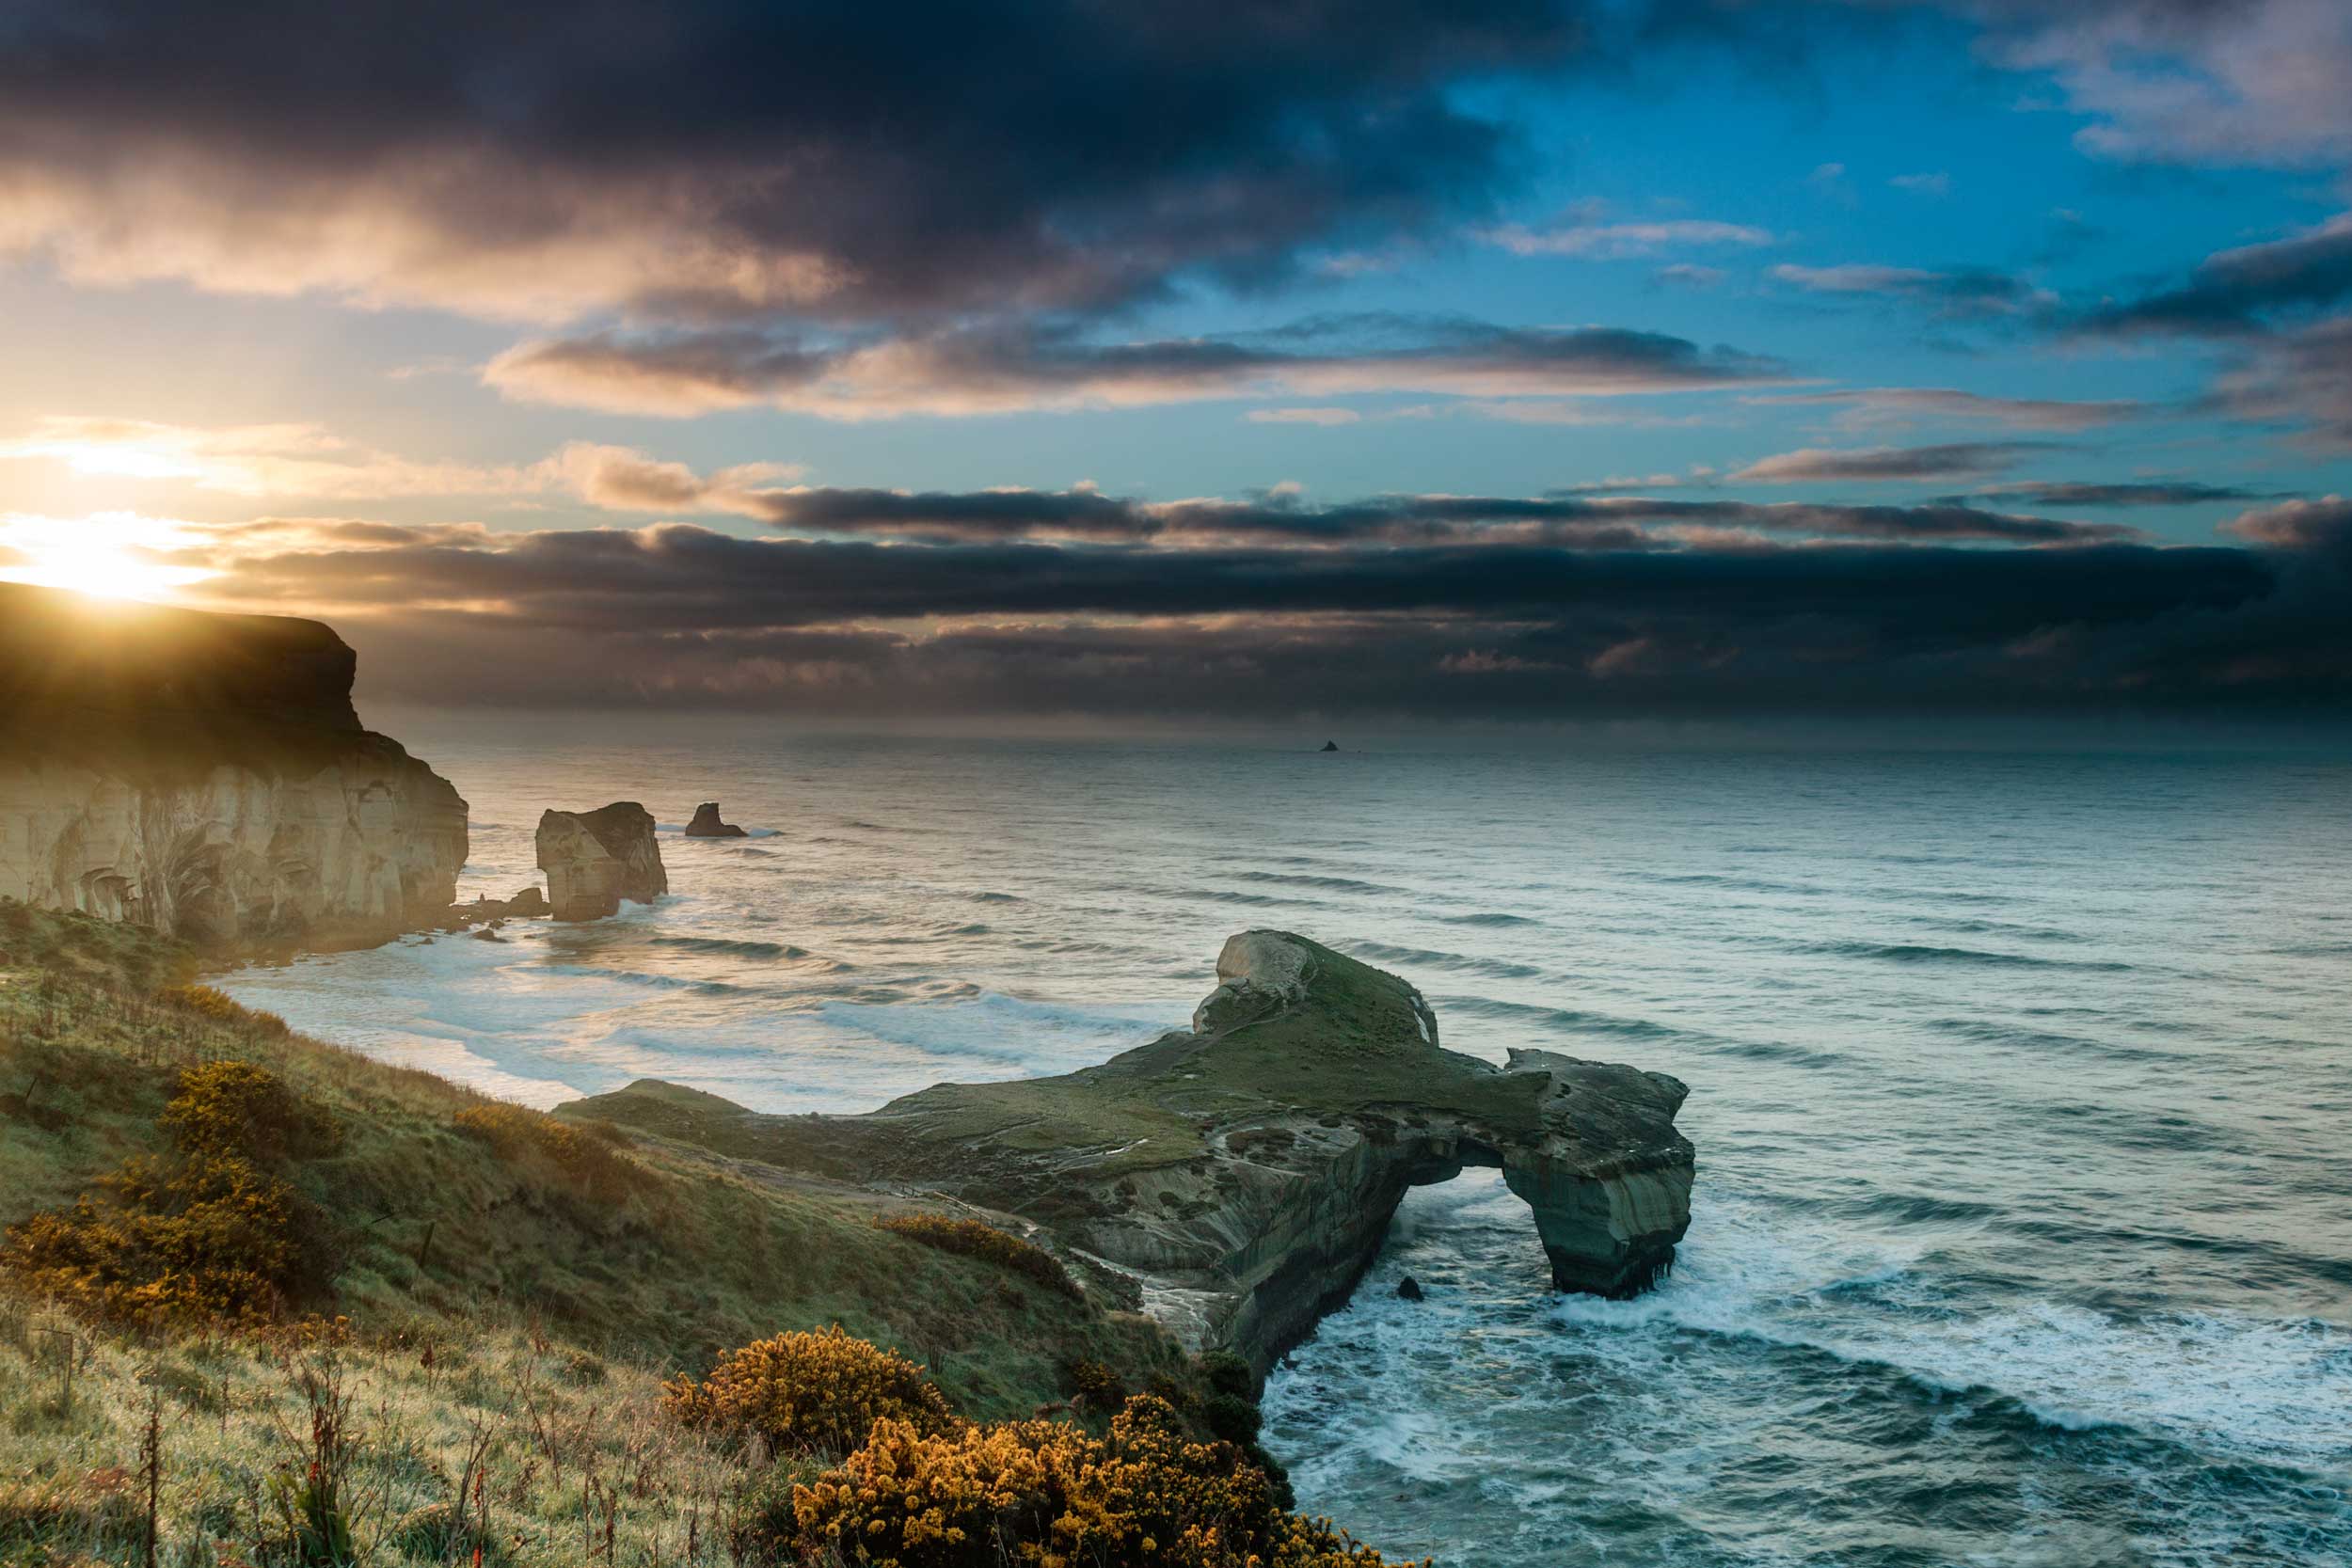 A promontory stretching out to sea with an archway at the end and the sun setting, New Zealand